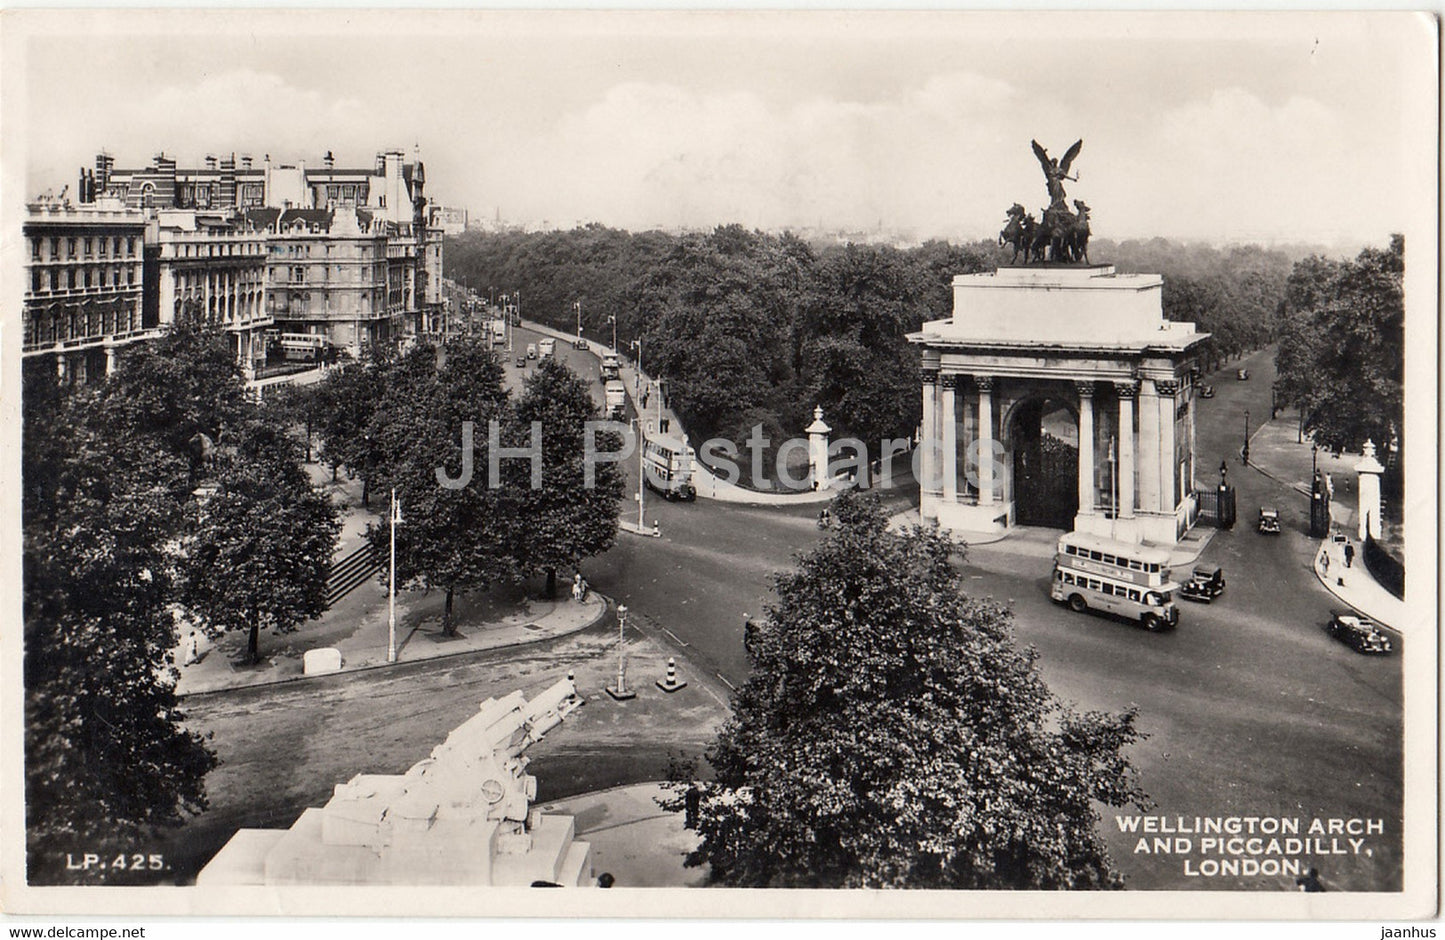 London - Wellington Arch and Piccadilly - bus - old postcard - 1954 - United Kingdom - England - used - JH Postcards